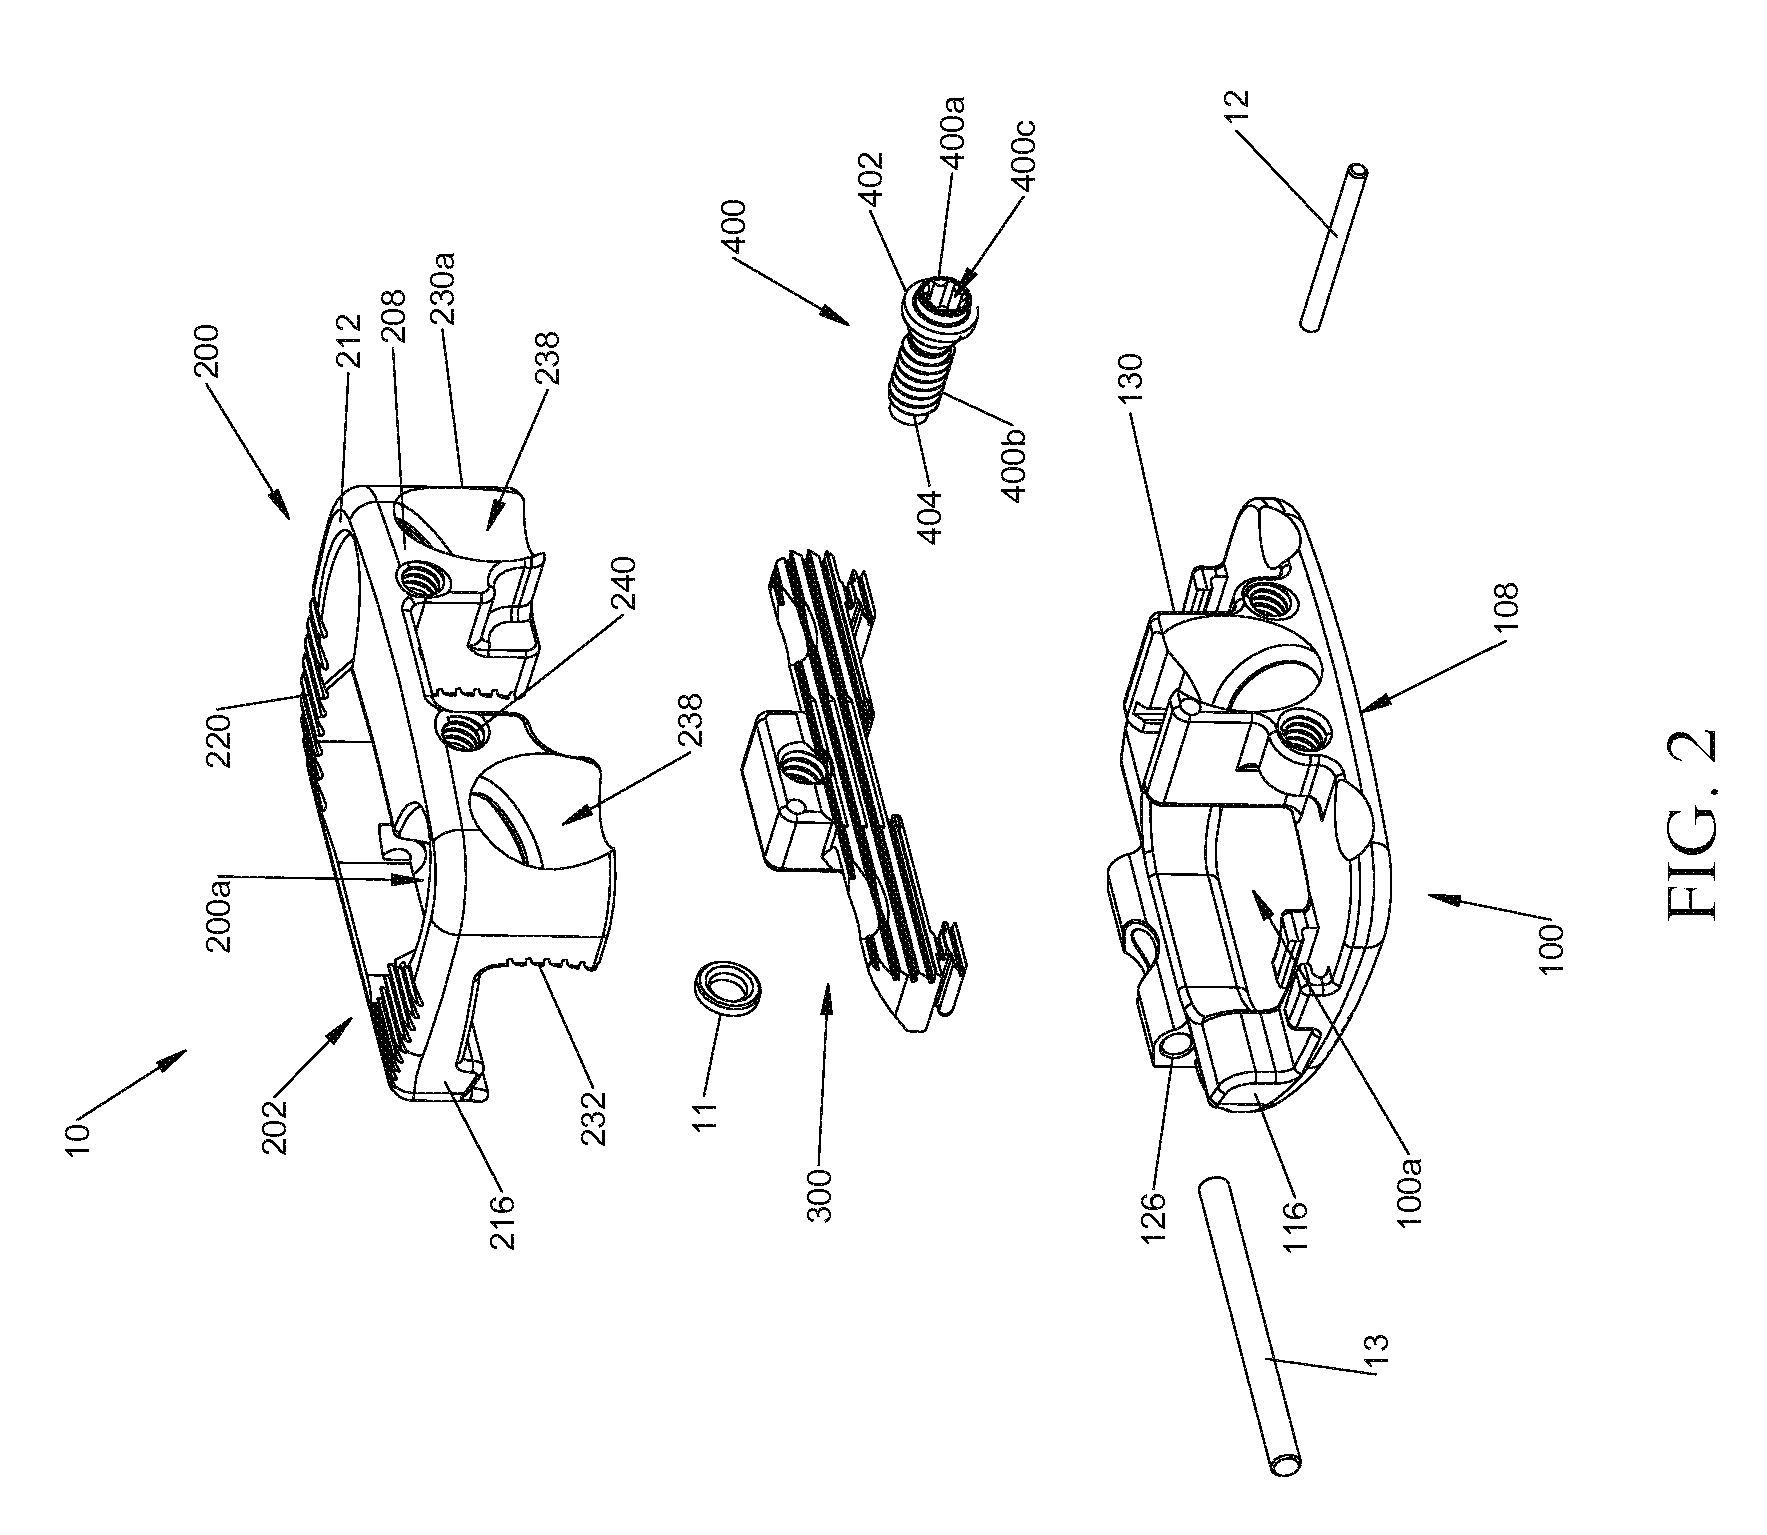 Expandable spinal interbody spacer and method of use